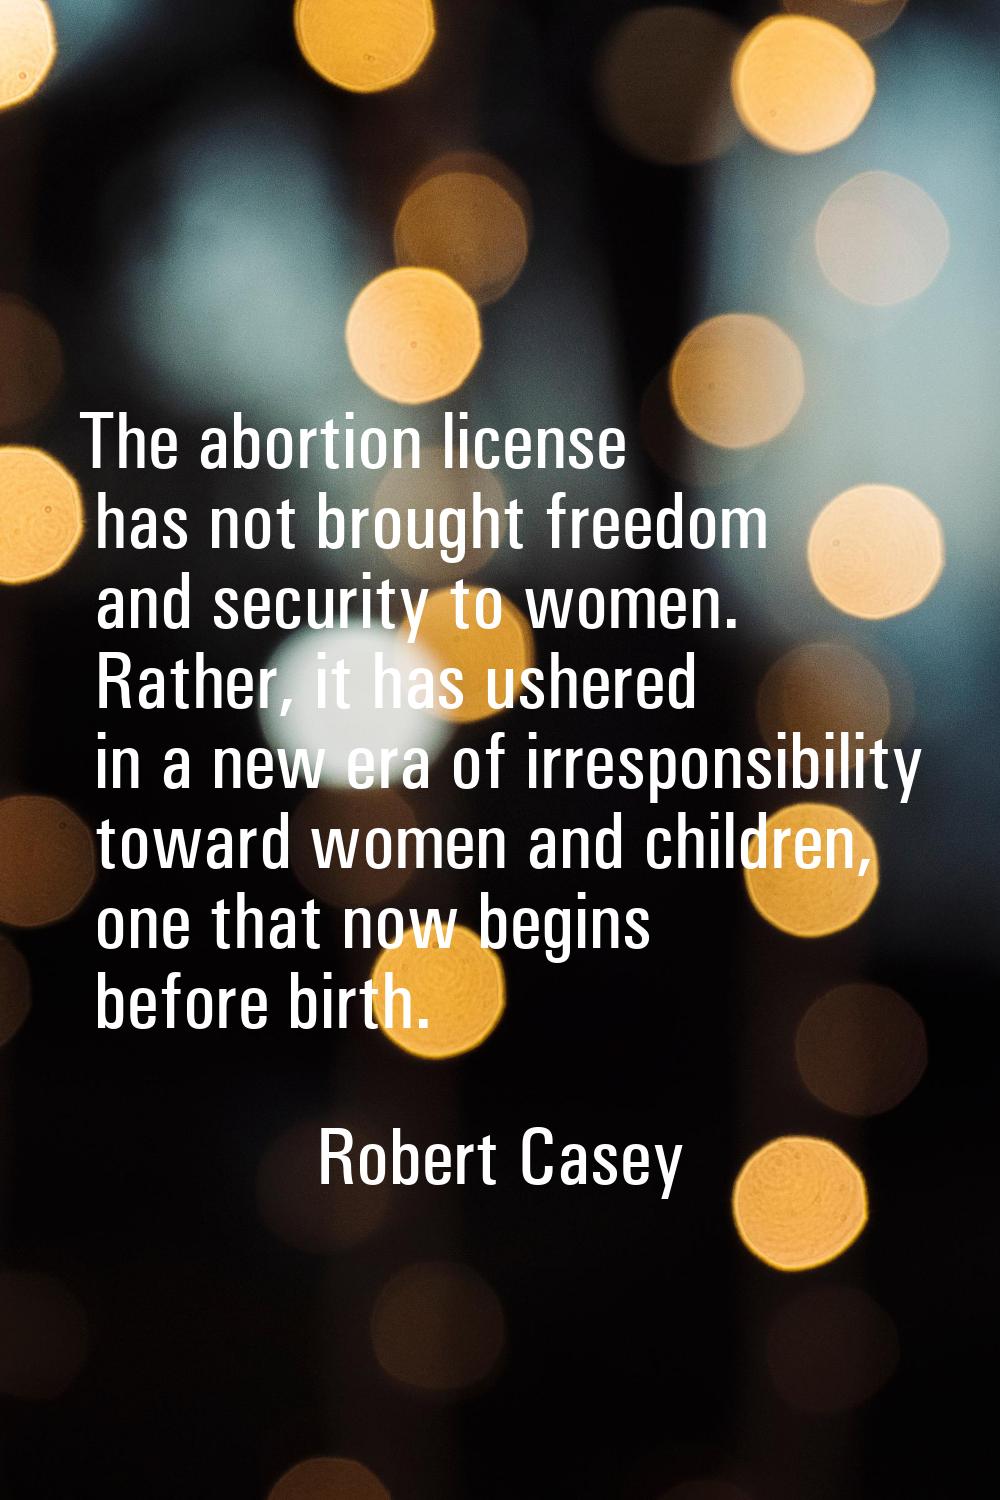 The abortion license has not brought freedom and security to women. Rather, it has ushered in a new